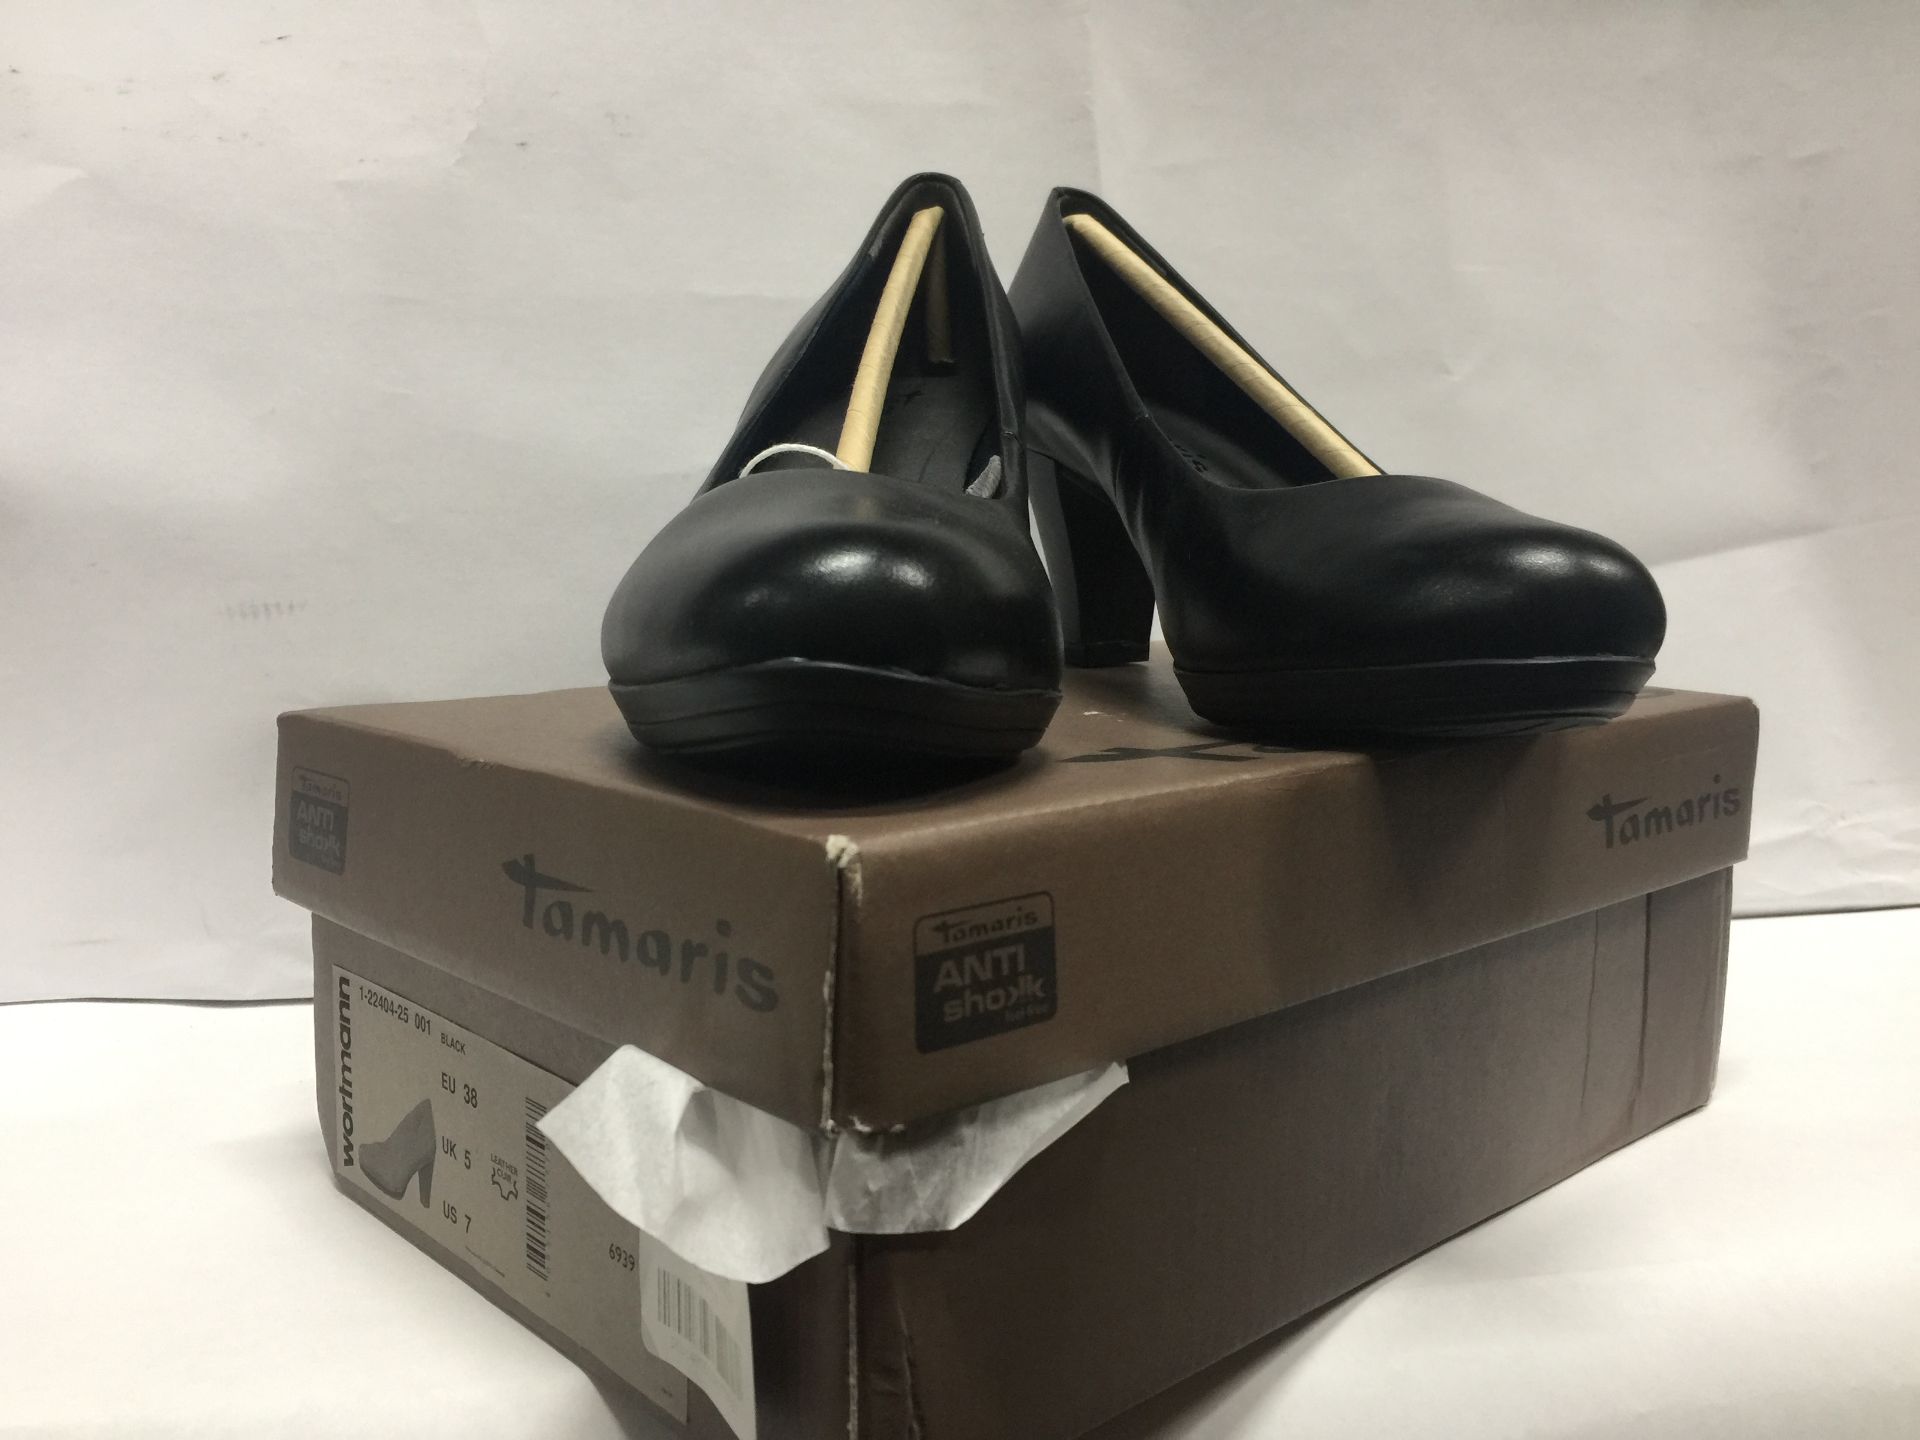 22 x Tamaris Womens Boots Mixed Sizes, Styles and Colours Size Ranging from EU37 - EU41 - Customer - Image 3 of 6